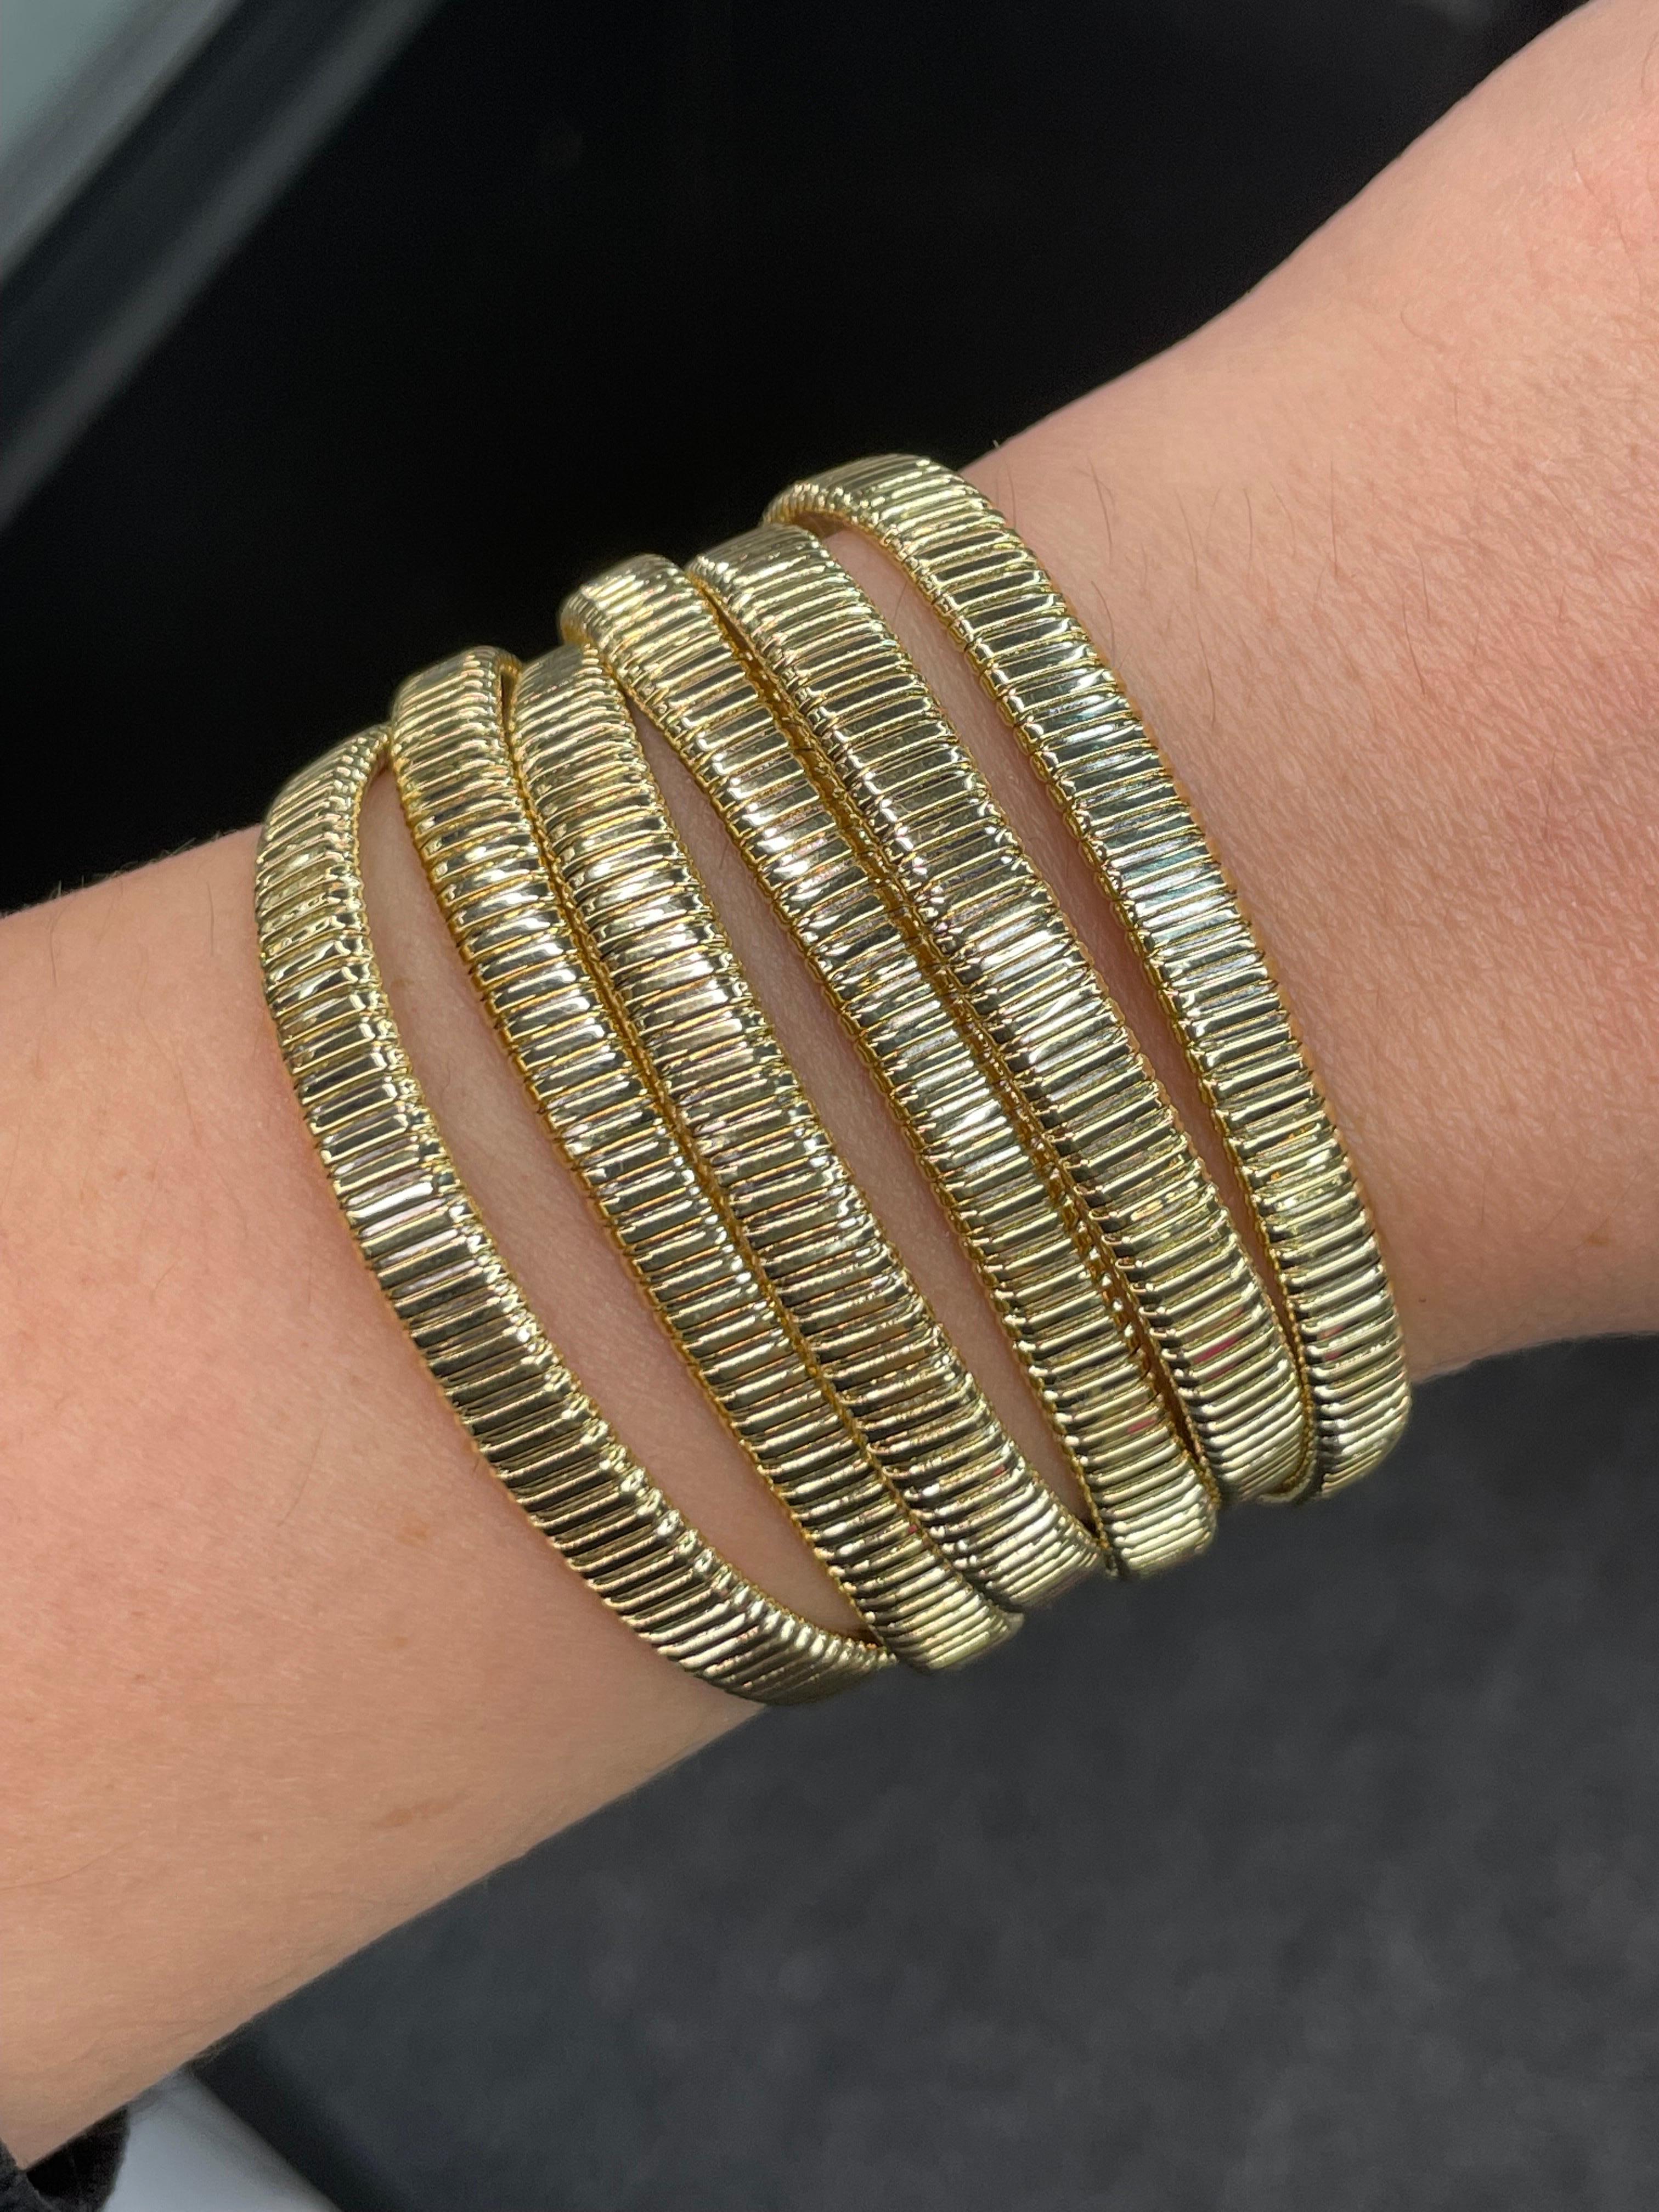 18 Karat Yellow Gold wide bracelet featuring 6 Tubogas rows weighing 48.9 Grams, Made in Italy.
Extremely comfortable on the wrist.
Larger version available.